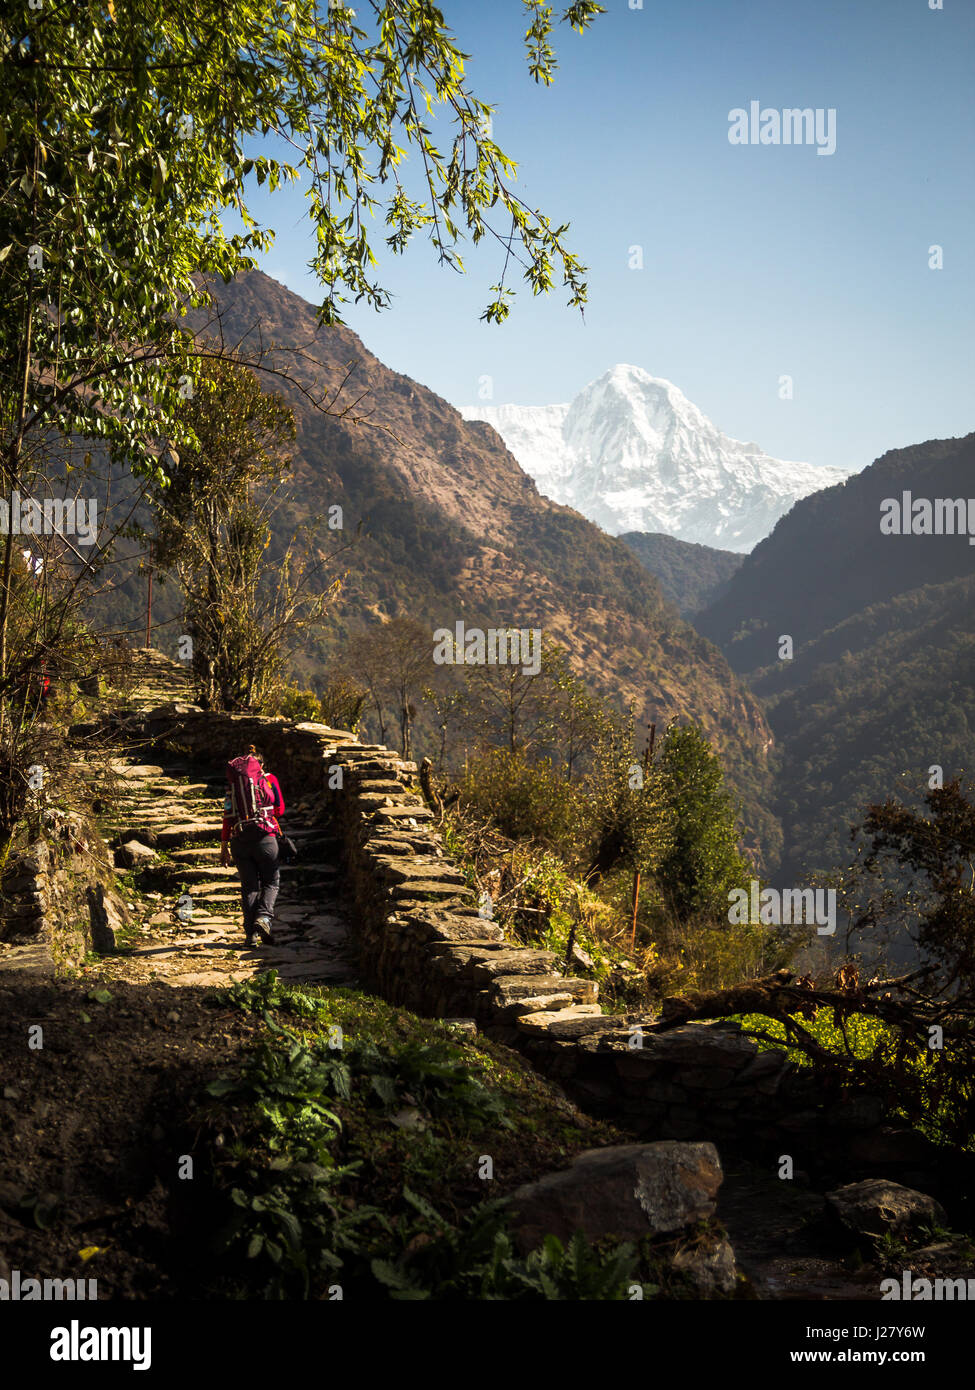 A woman treks up a flight of stairs on the Annapurna circuit, Nepal, with the peak of Annapurna south visible in the background. Stock Photo